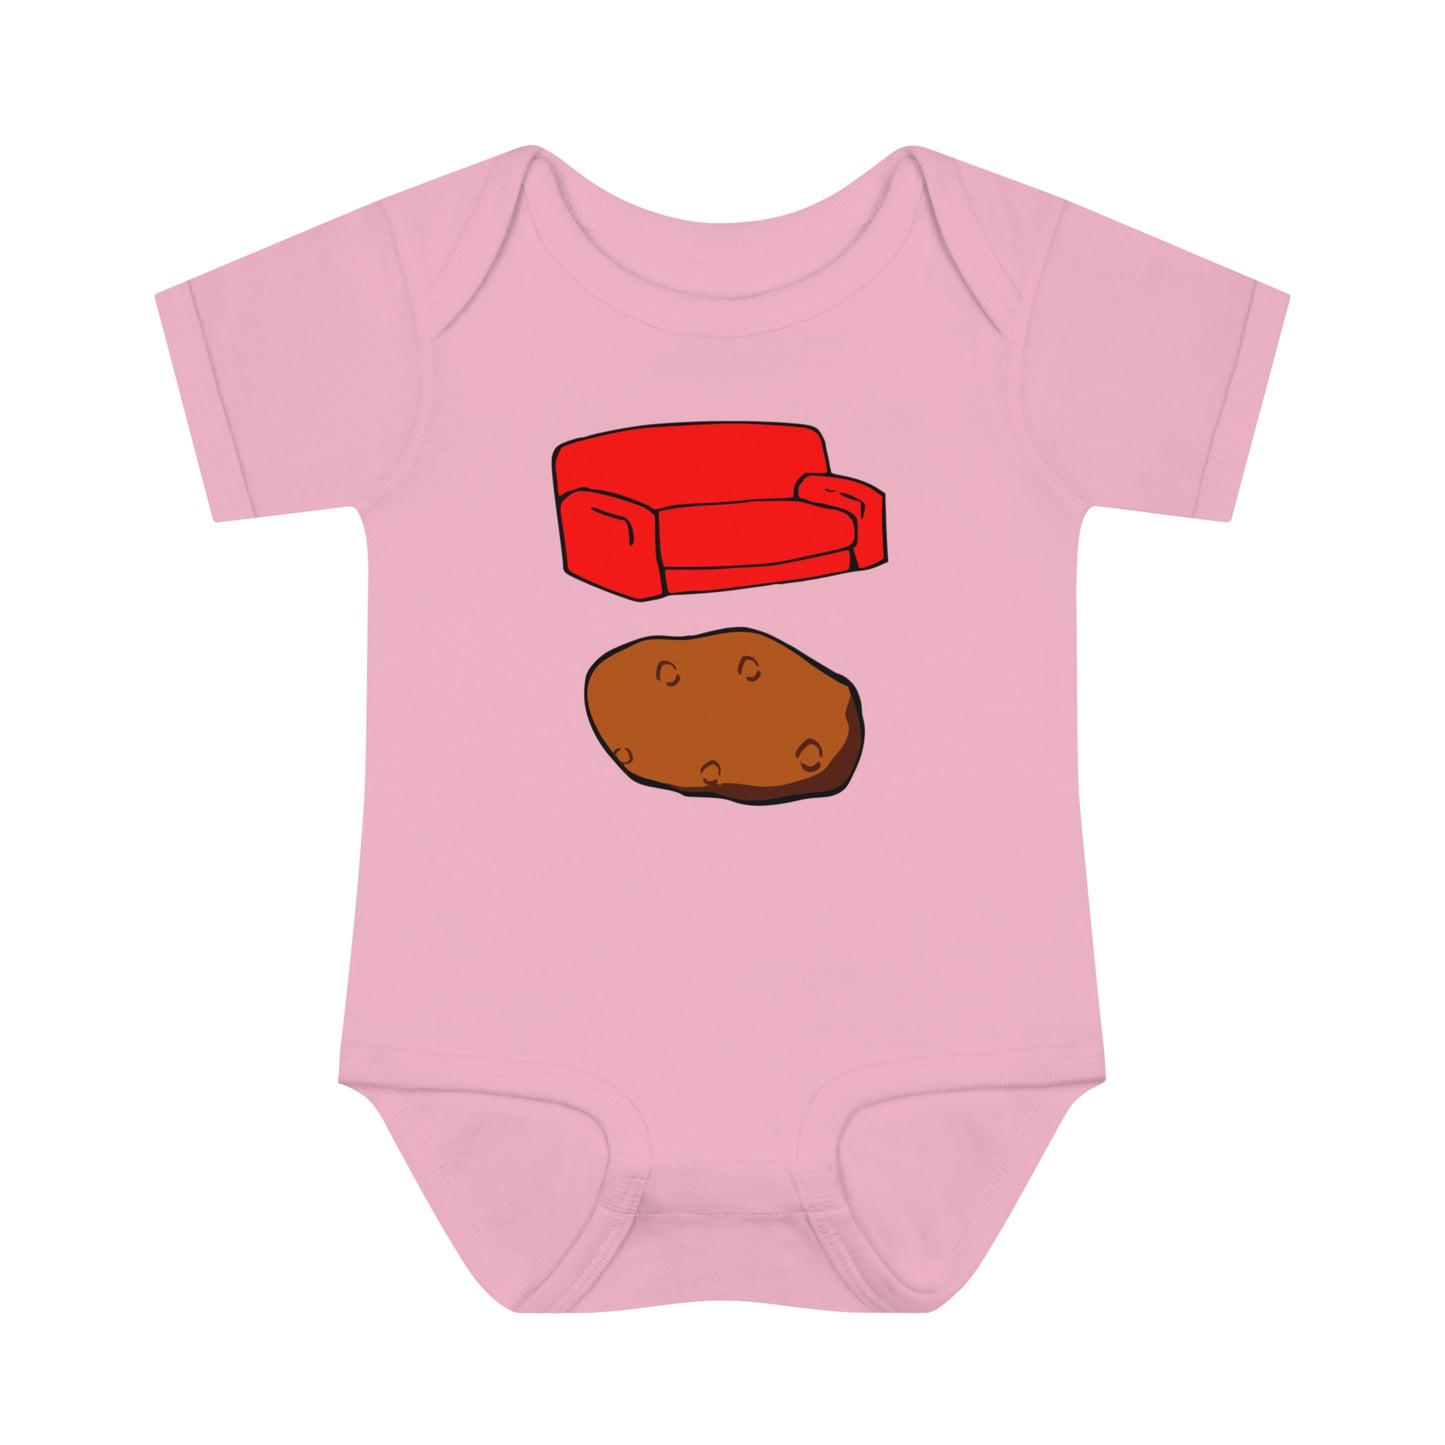 Couch Potato Bodysuit, Infant One Piece Football Fan, Graphic Tee showing Couch and a Potato, Baby Football Fan T-Shirt, Cute Baby Tee